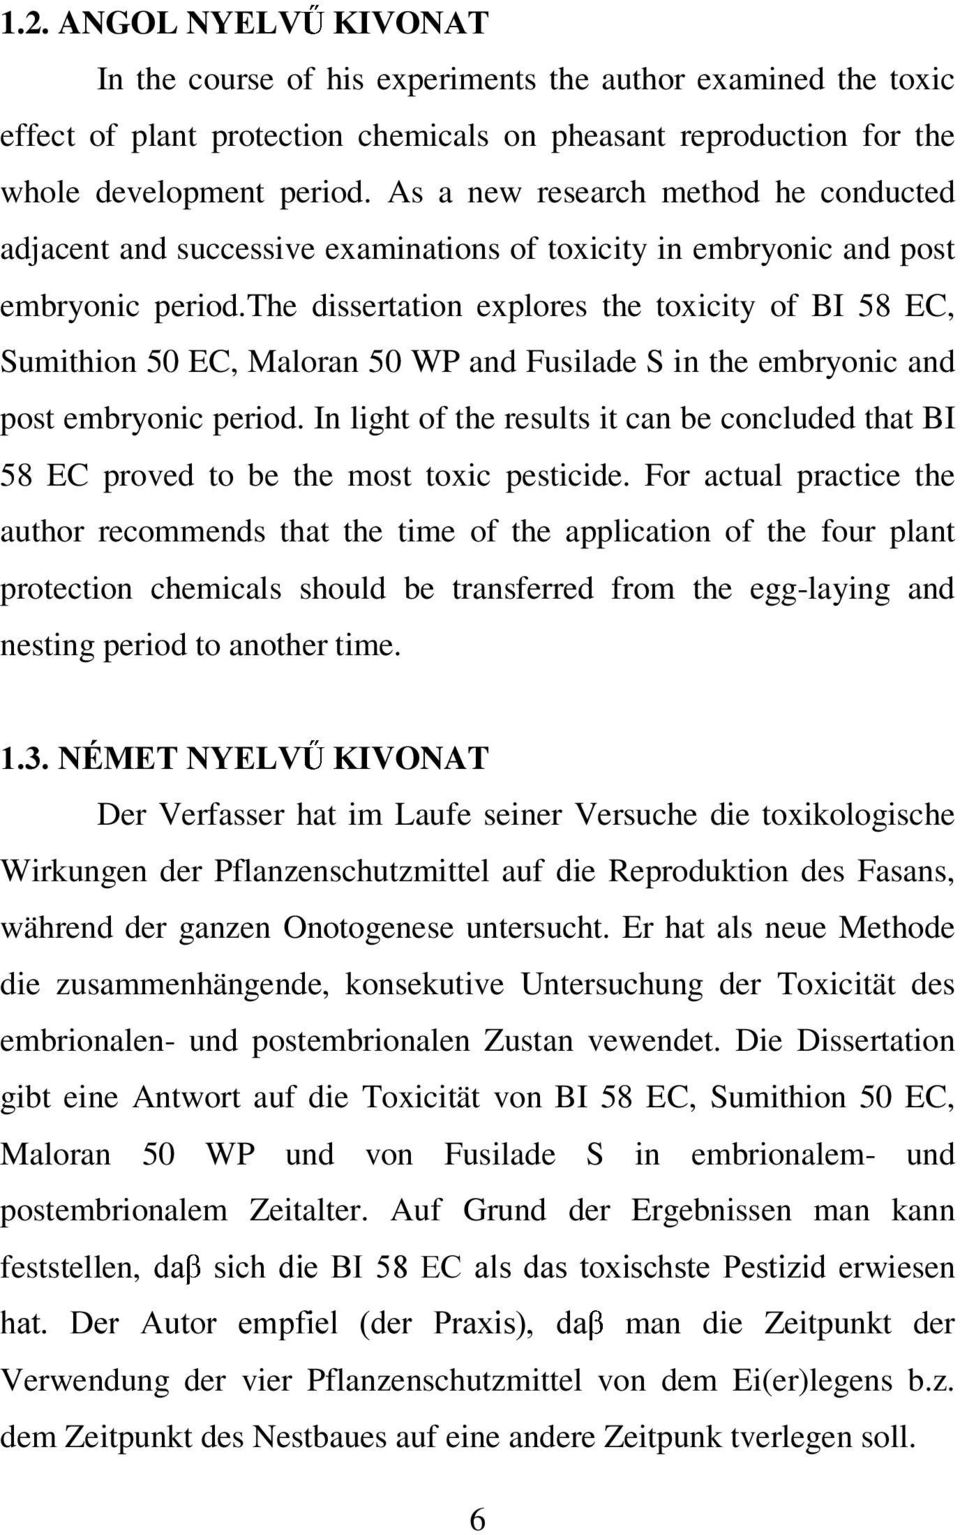 the dissertation explores the toxicity of BI 58 EC, Sumithion 50 EC, Maloran 50 WP and Fusilade S in the embryonic and post embryonic period.